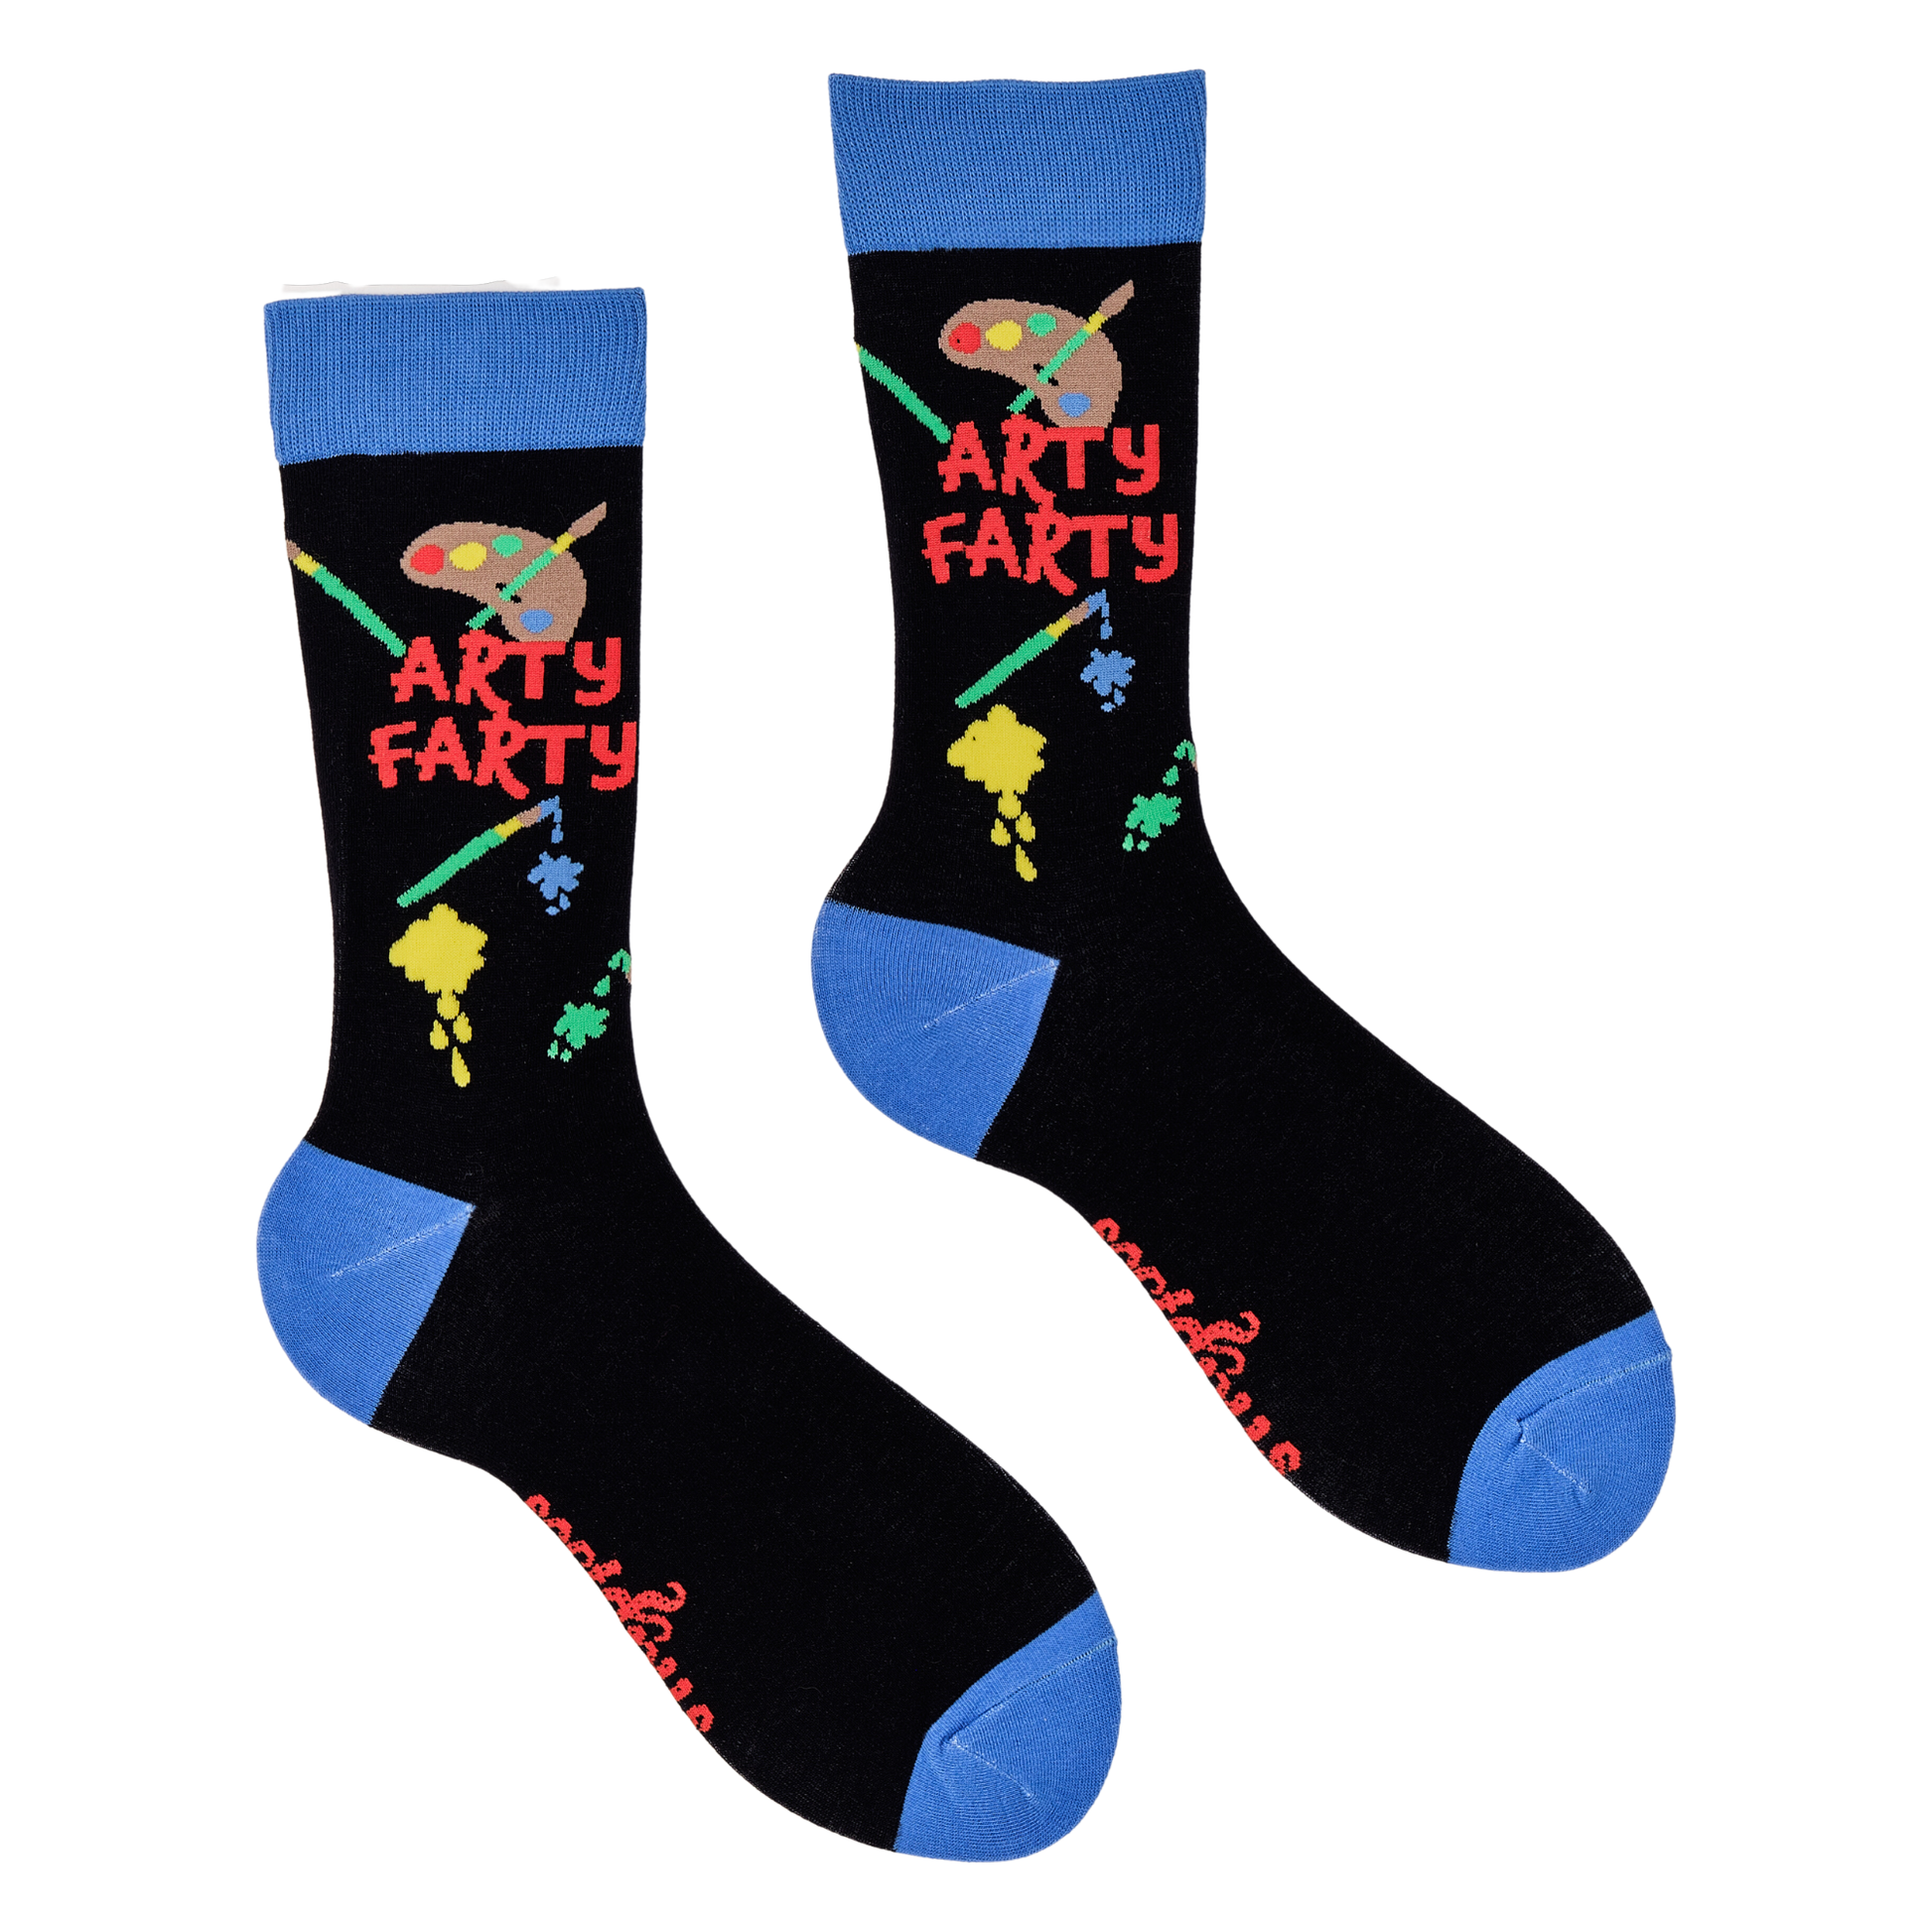 A pair of socks depicting an artist pallet and paint splashes. Dark blue legs, light blue cuff, heel and toe.